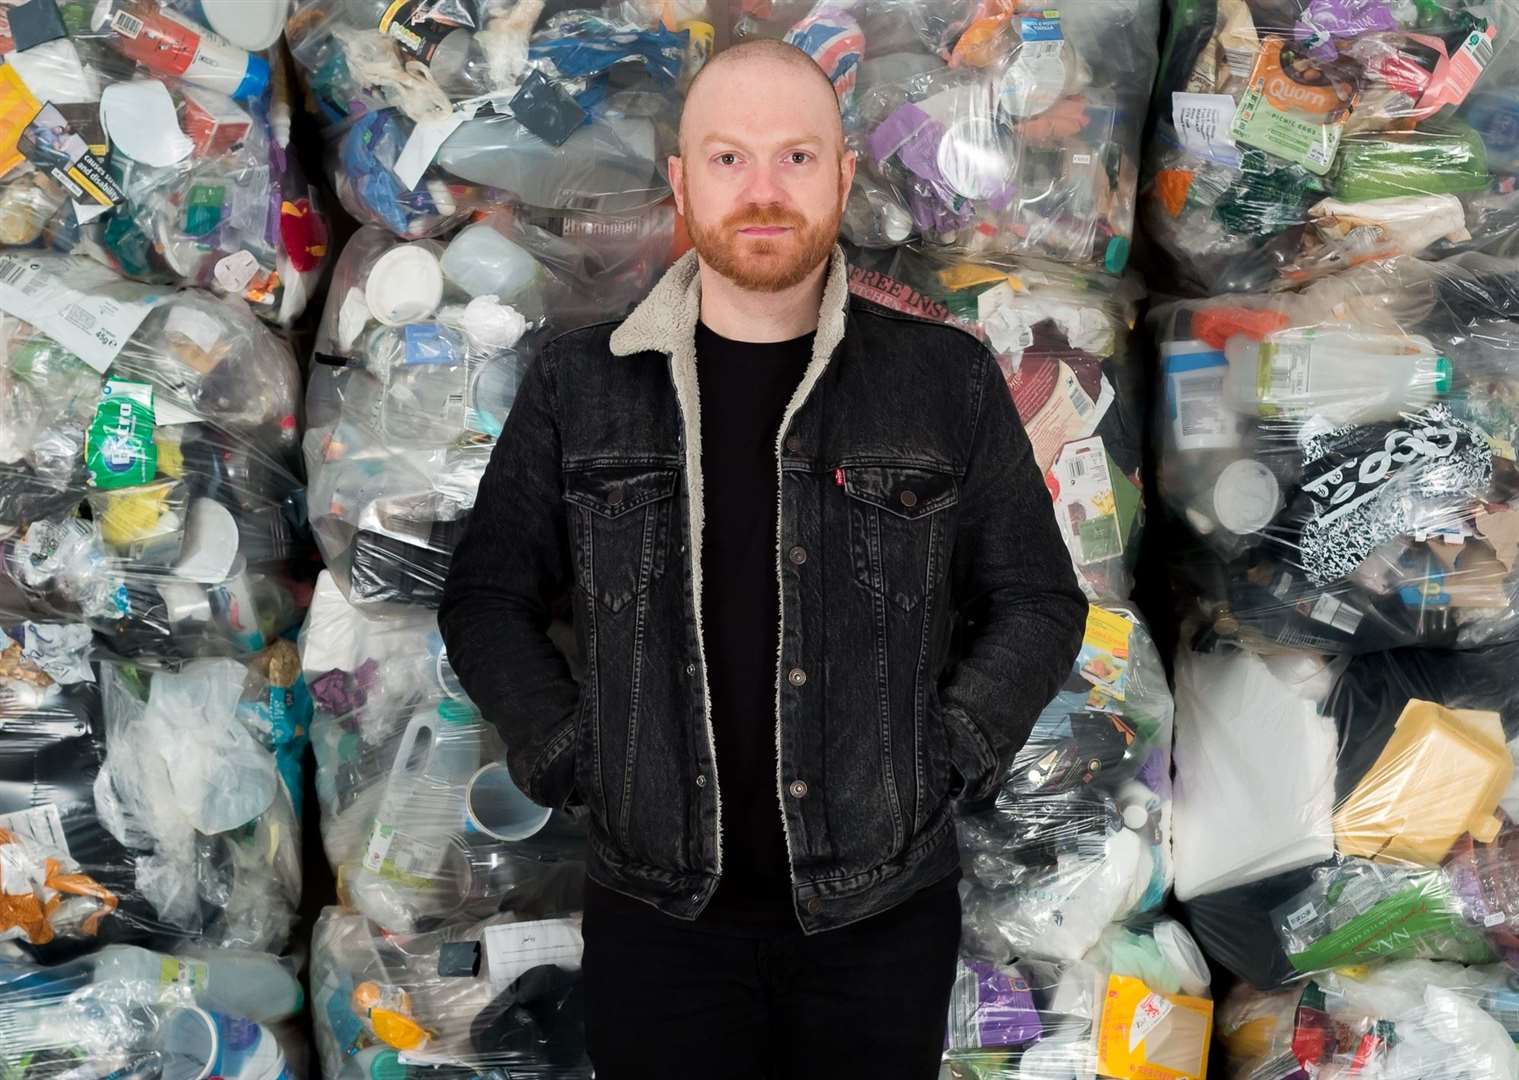 Daniel has been on a journey to reduce plastic waste for the last few years. Photo by Ollie Harrop.